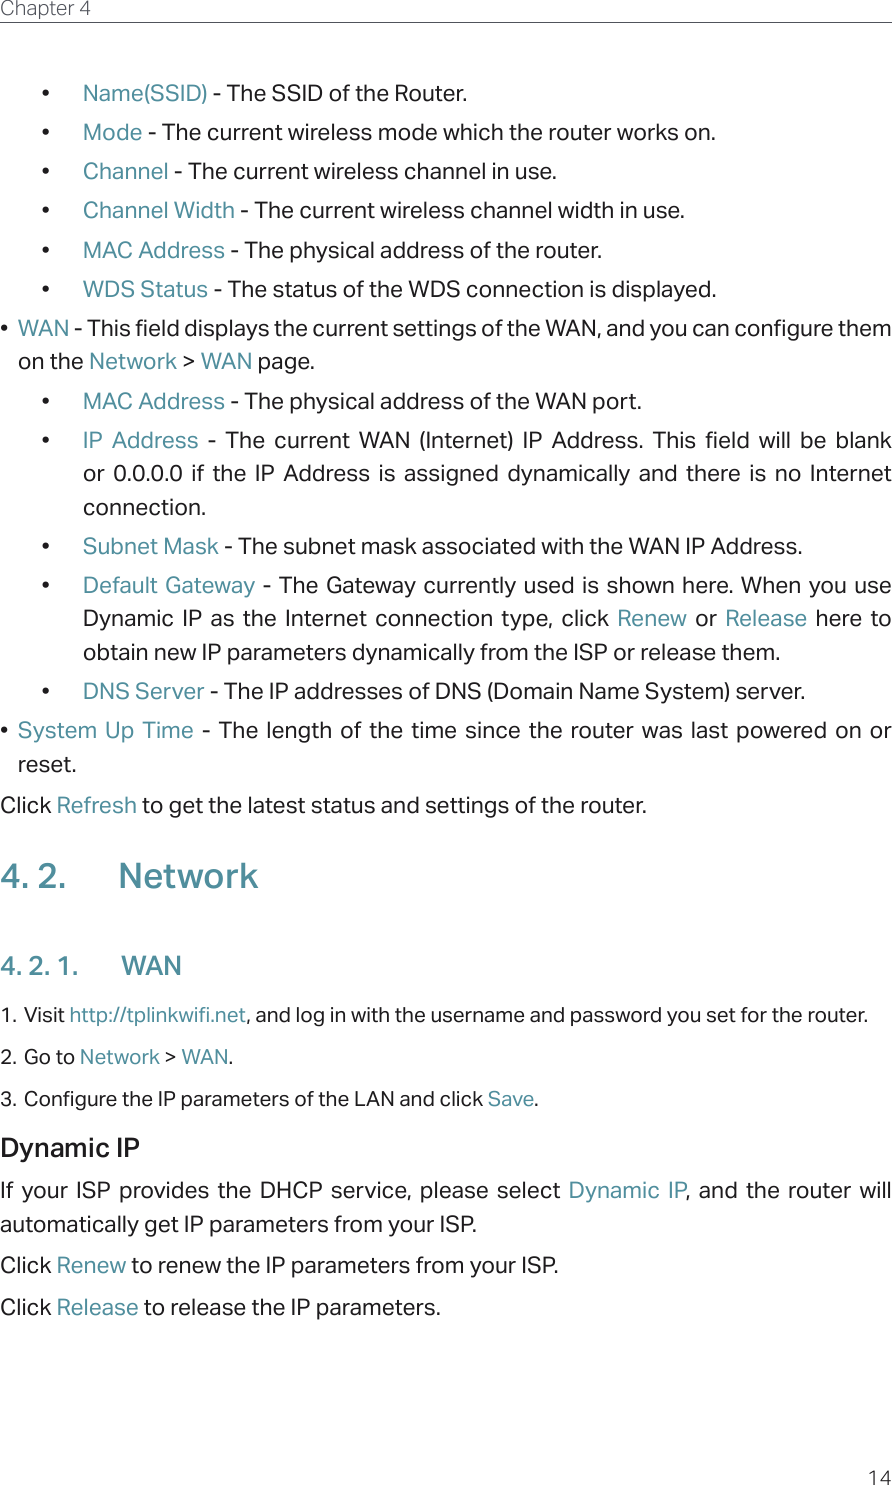 14Chapter 4  •  Name(SSID) - The SSID of the Router.•  Mode - The current wireless mode which the router works on.•  Channel - The current wireless channel in use.•  Channel Width - The current wireless channel width in use.•  MAC Address - The physical address of the router.•  WDS Status - The status of the WDS connection is displayed.•  WAN - This field displays the current settings of the WAN, and you can configure them on the Network &gt; WAN page.•  MAC Address - The physical address of the WAN port.•  IP Address - The current WAN (Internet) IP Address. This field will be blank or 0.0.0.0 if the IP Address is assigned dynamically and there is no Internet connection.•  Subnet Mask - The subnet mask associated with the WAN IP Address.•  Default Gateway - The Gateway currently used is shown here. When you use Dynamic IP as the Internet connection type, click Renew  or  Release here to obtain new IP parameters dynamically from the ISP or release them.•  DNS Server - The IP addresses of DNS (Domain Name System) server.•  System Up Time - The length of the time since the router was last powered on or reset.Click Refresh to get the latest status and settings of the router.4. 2.  Network4. 2. 1.  WAN1. Visit http://tplinkwifi.net, and log in with the username and password you set for the router.2. Go to Network &gt; WAN.3. Configure the IP parameters of the LAN and click Save.Dynamic IPIf your ISP provides the DHCP service, please select Dynamic IP, and the router will automatically get IP parameters from your ISP.Click Renew to renew the IP parameters from your ISP. Click Release to release the IP parameters.